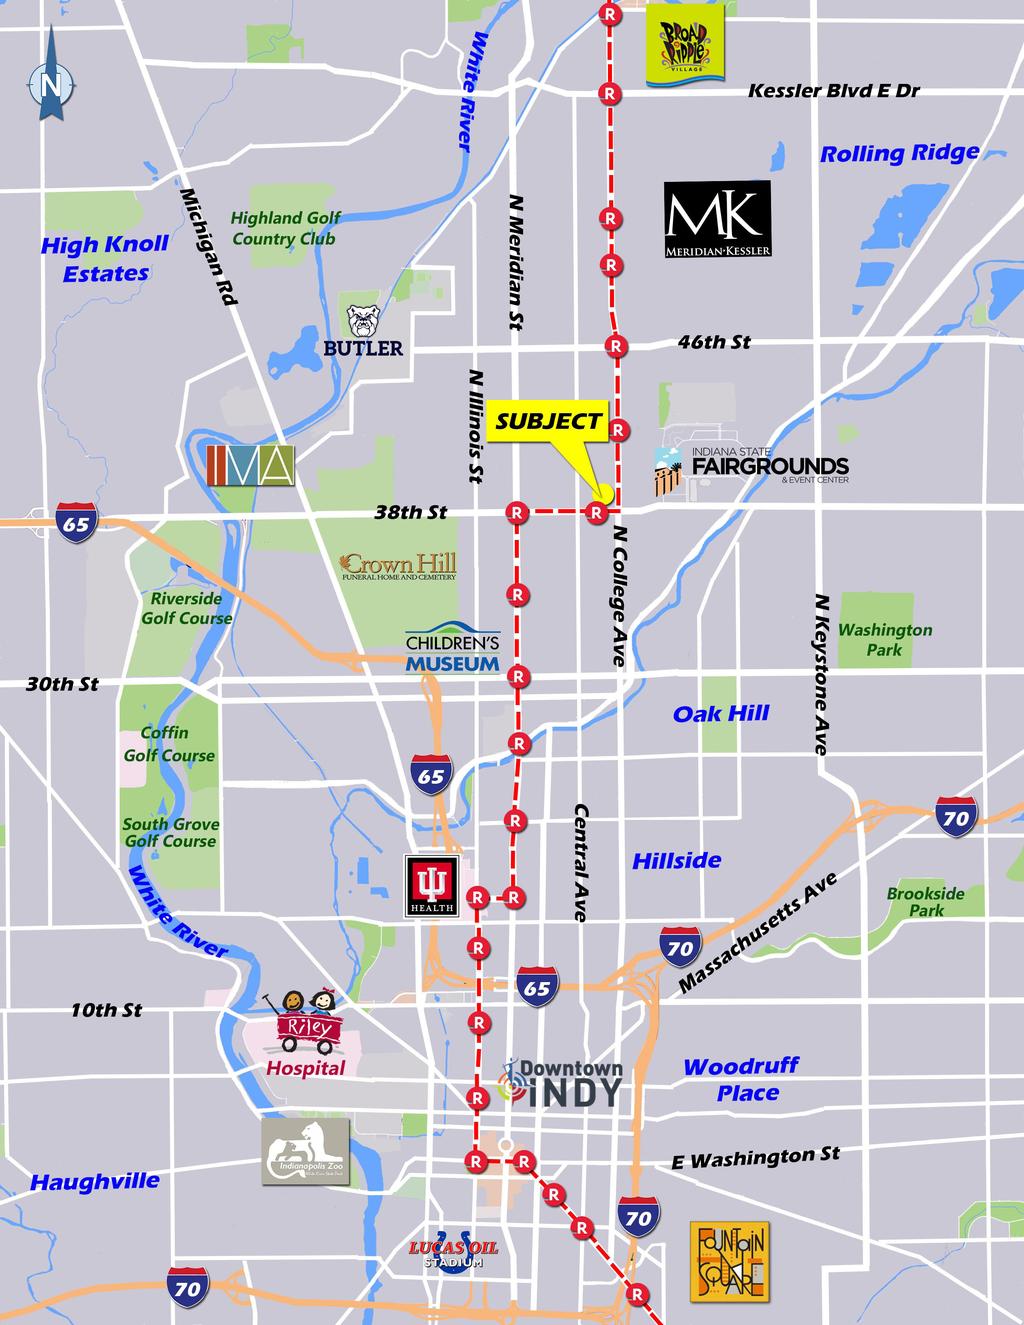 INDY S RED LINE TRANSIT The first all-electric bus rapid transit (BRT) service in the national and the first rapid transit service in Indiana The Red Line BRT will eventually connect the cities of